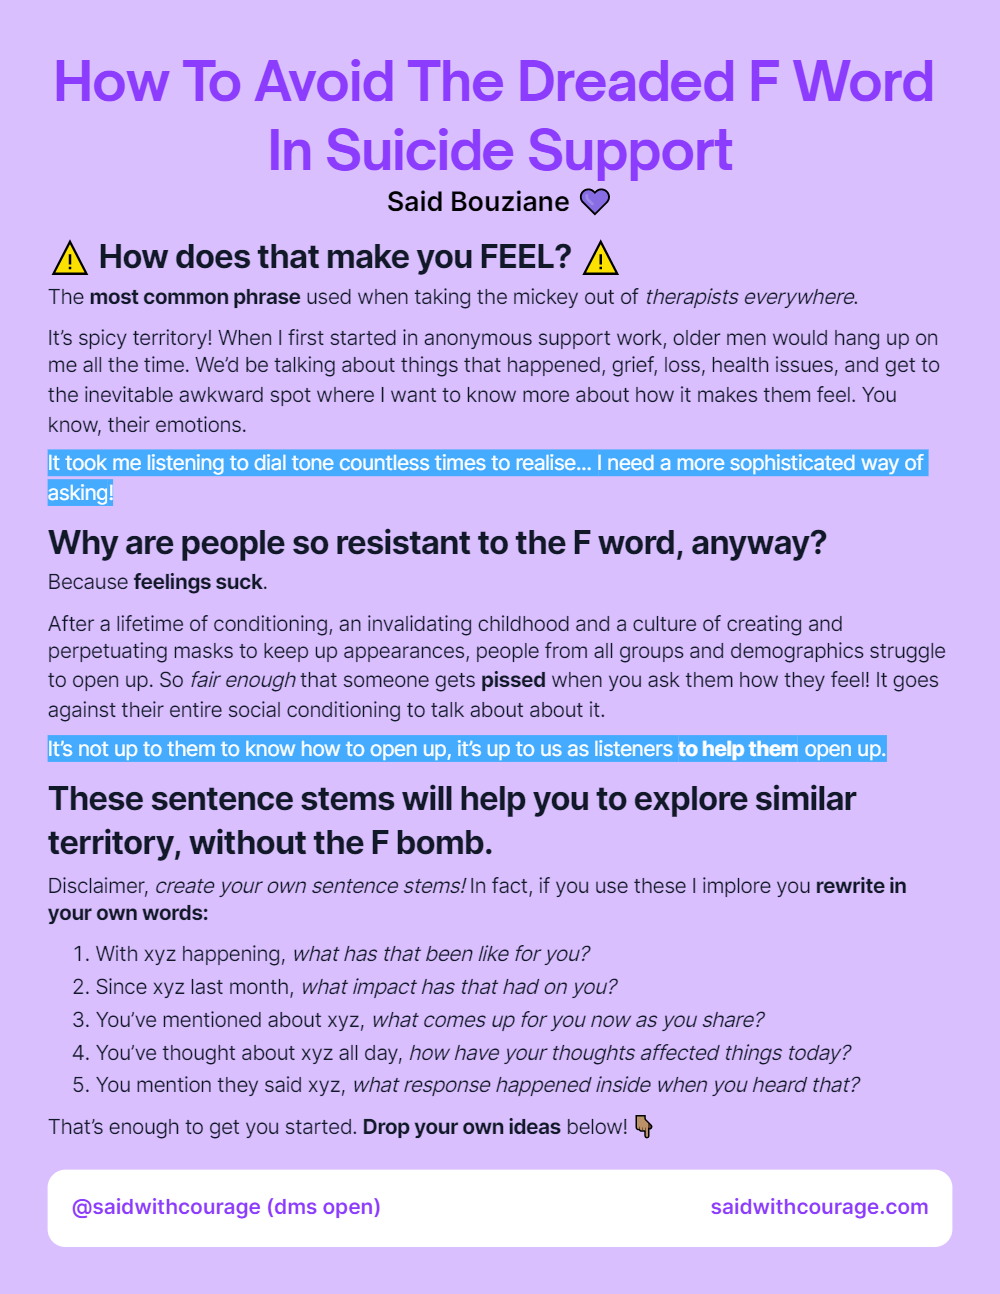 How To Avoid The Dreaded F Word In Suicide Support